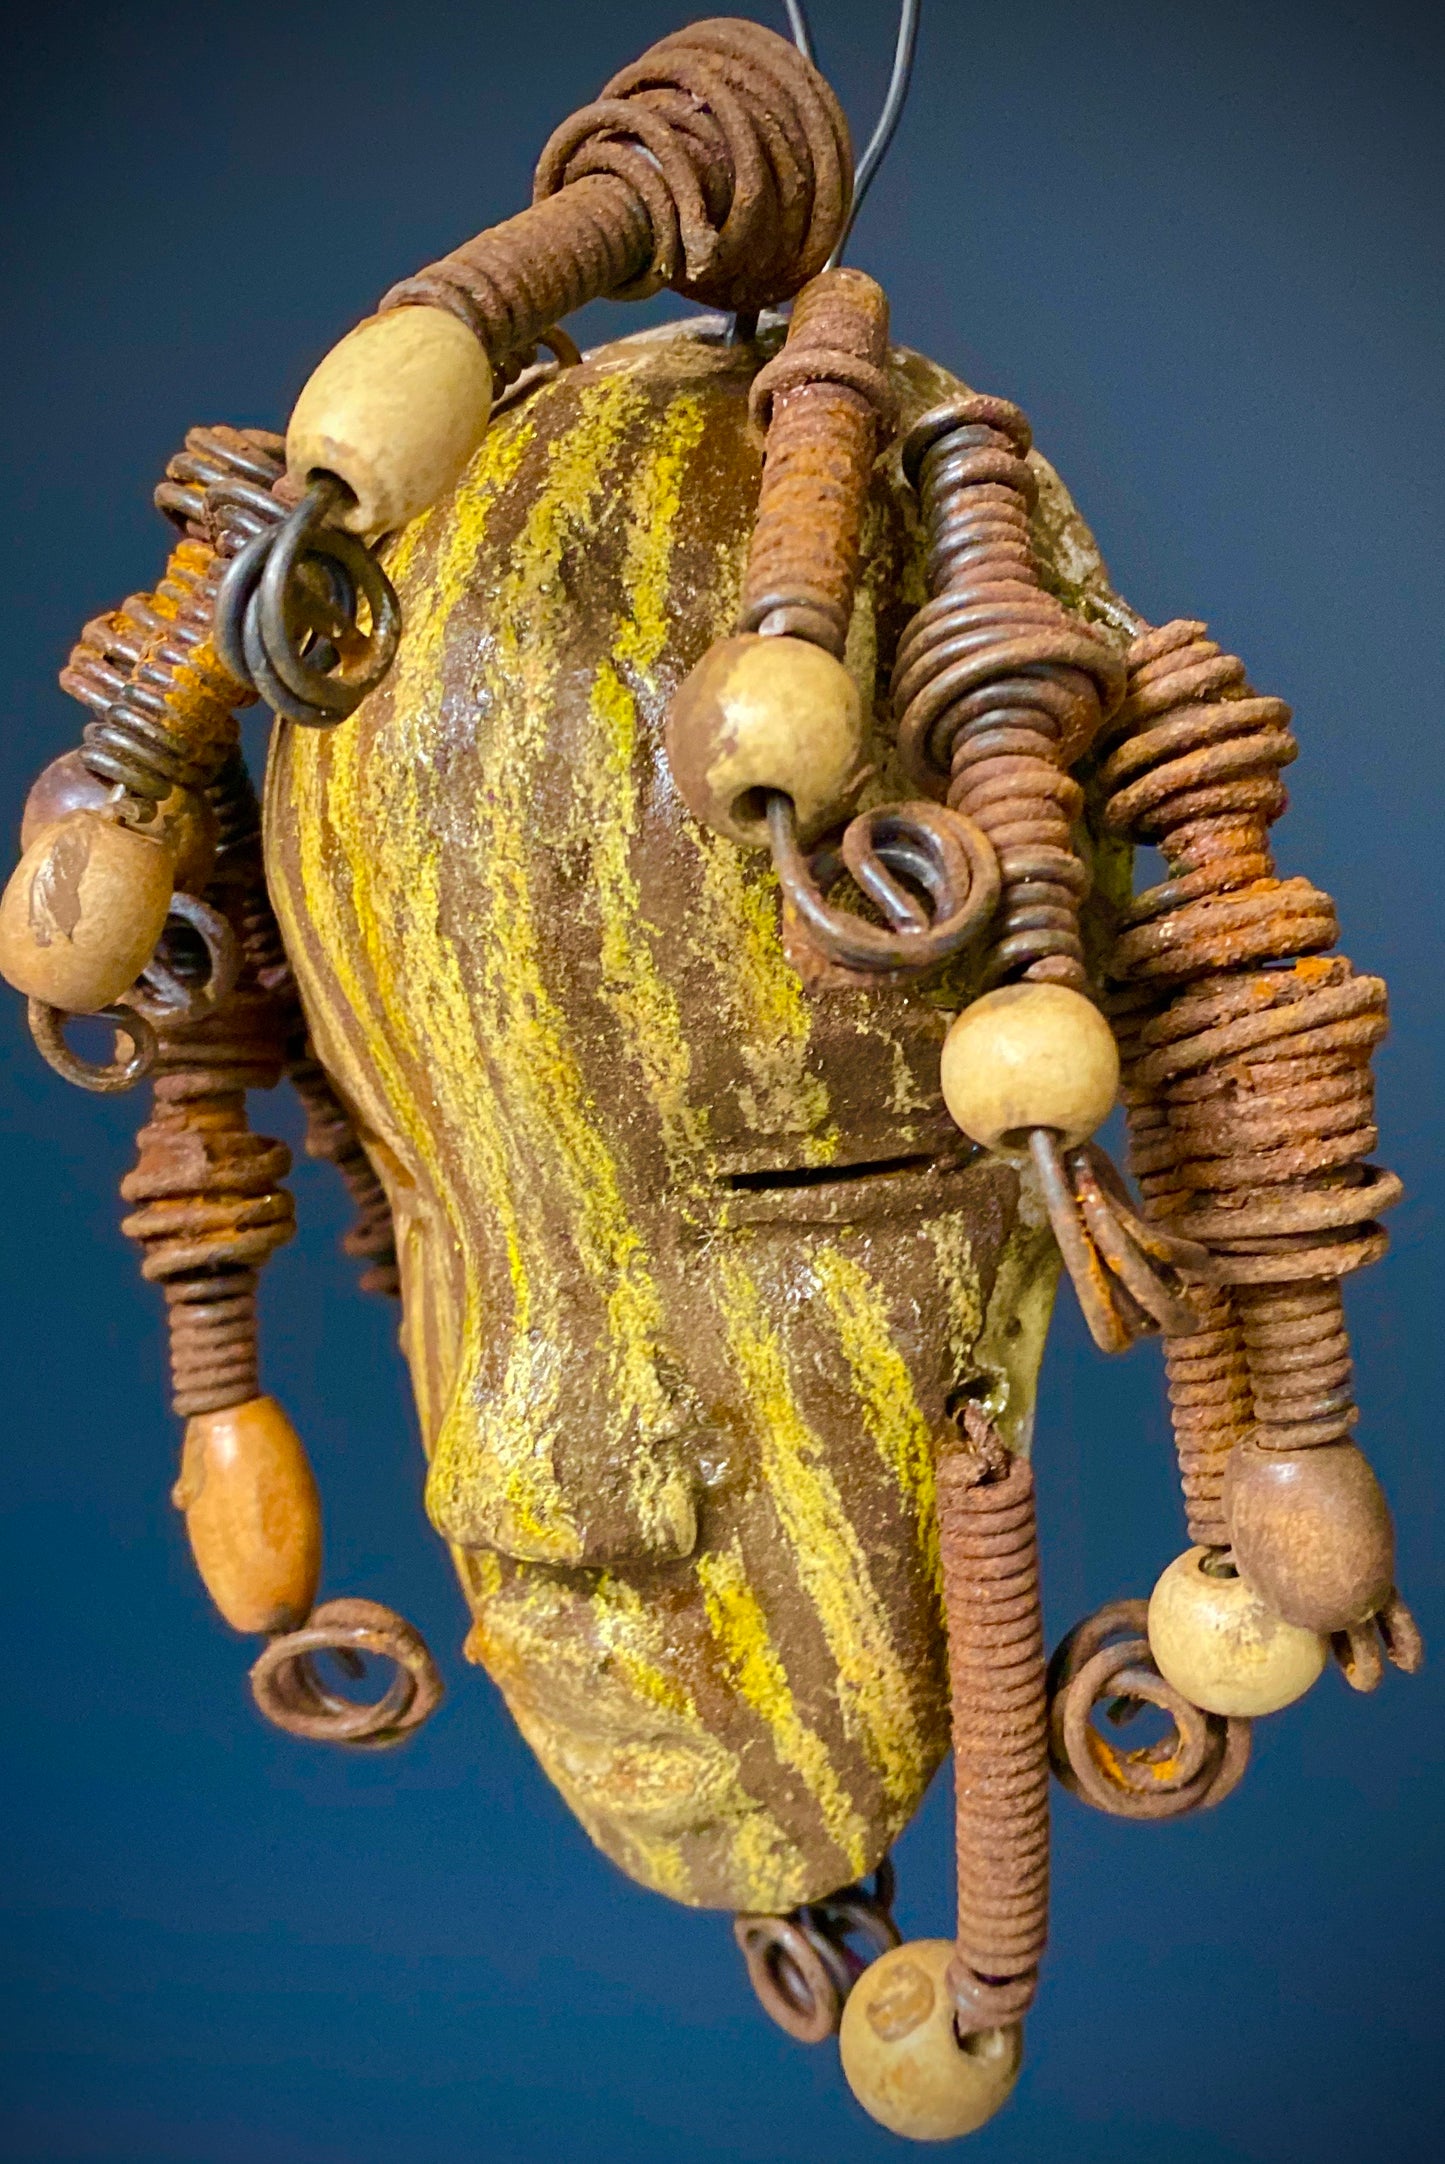 I started making art soon after seeing authentic African artwork at the Smithsonian Museum of African Art. I was in total awe.  Kaba was inspired by my visit there.   Kaba has a two tone  striped complexion of earthy gold and brown. He is 5" x 7” and weighs 1 lbs. Kaba has over 10 wooden beads. He has over 10 feet of coiled 16 gauge wire hair. If for some reason Kaba does not fit in your home, send him back for a full refund!